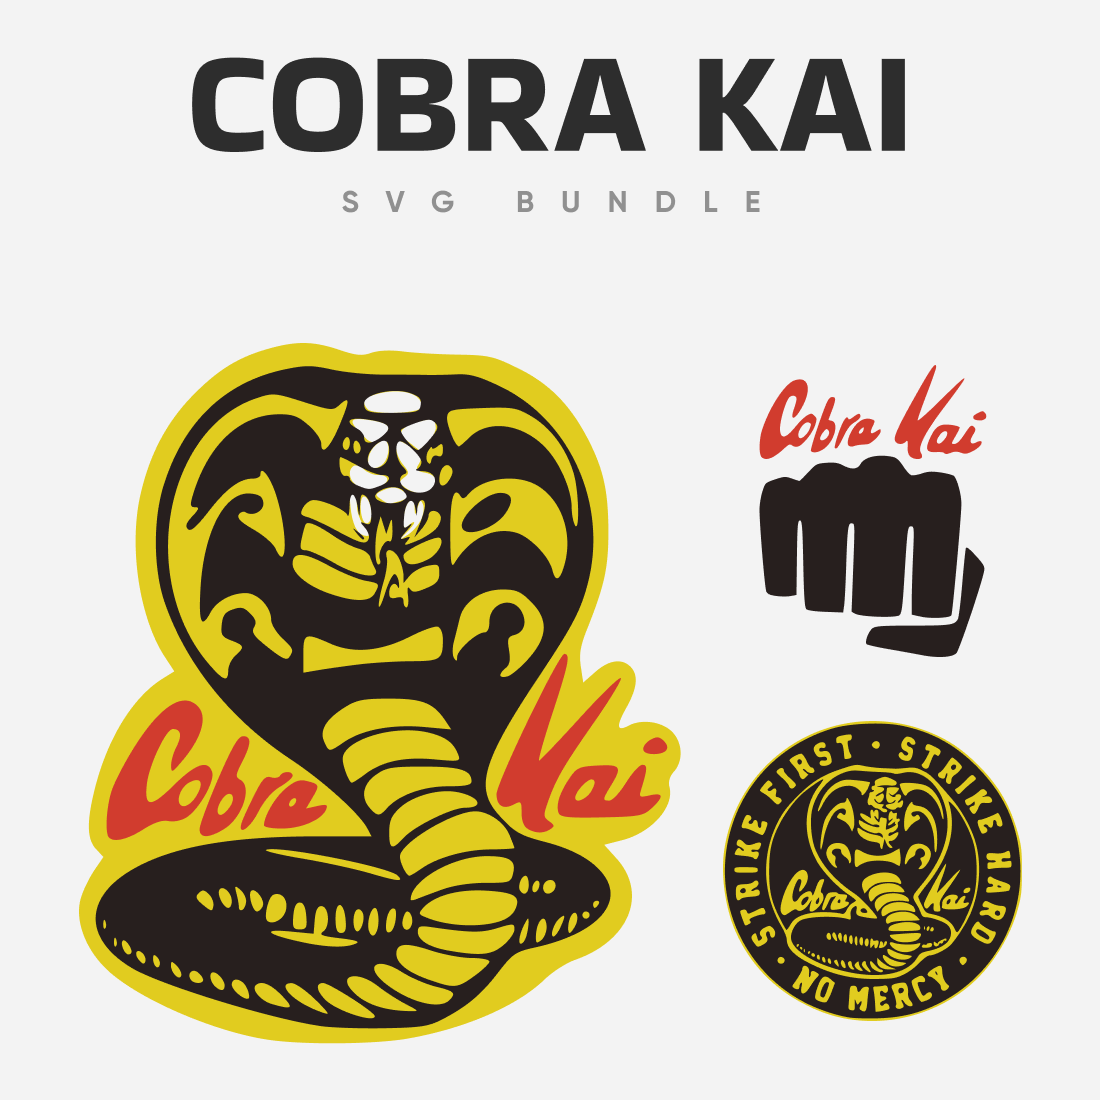 Cobra stickers on a white background.